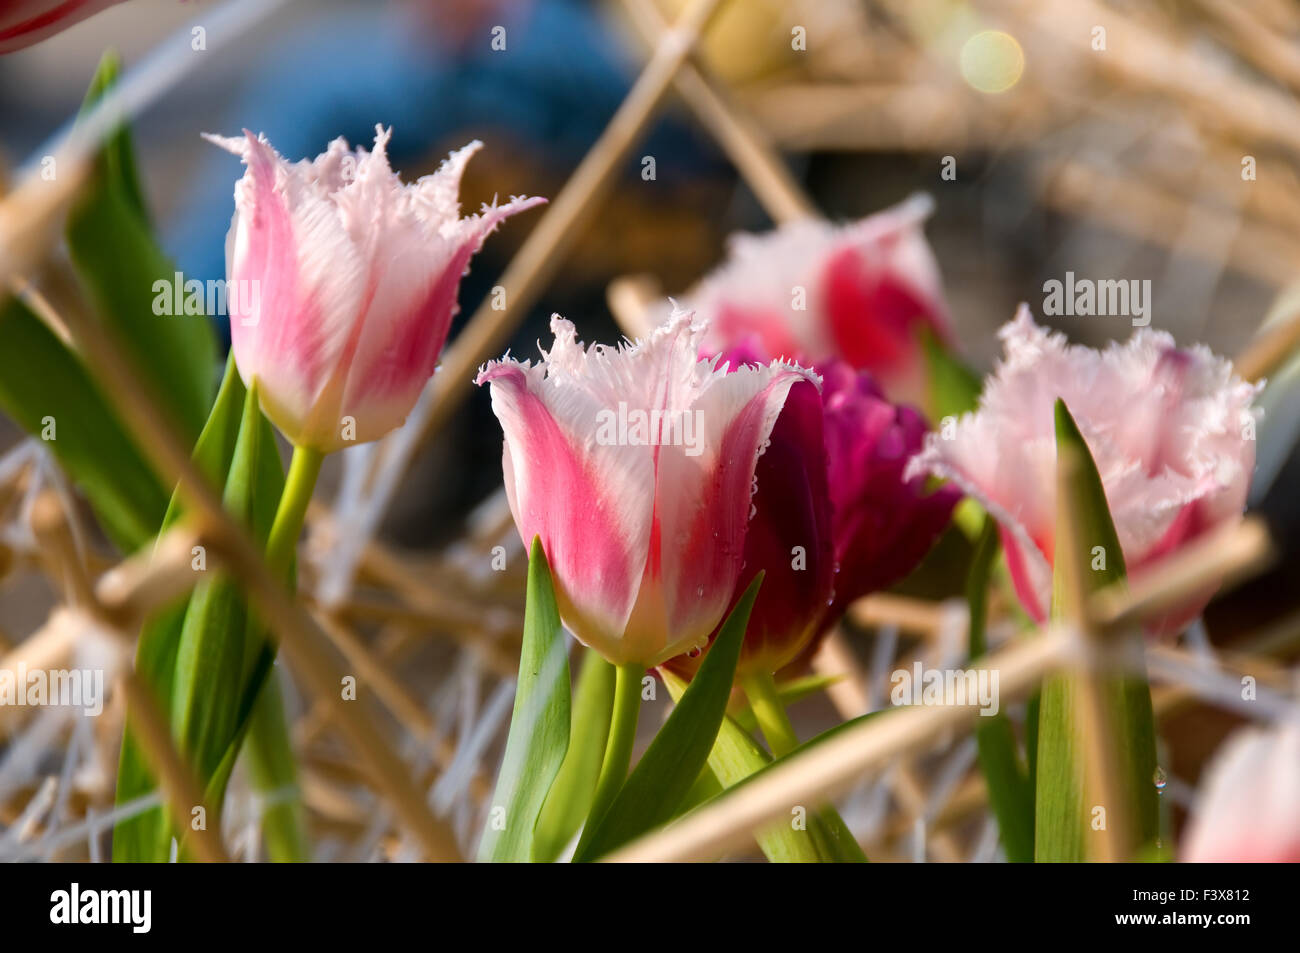 The view of pink tulips flowers Stock Photo